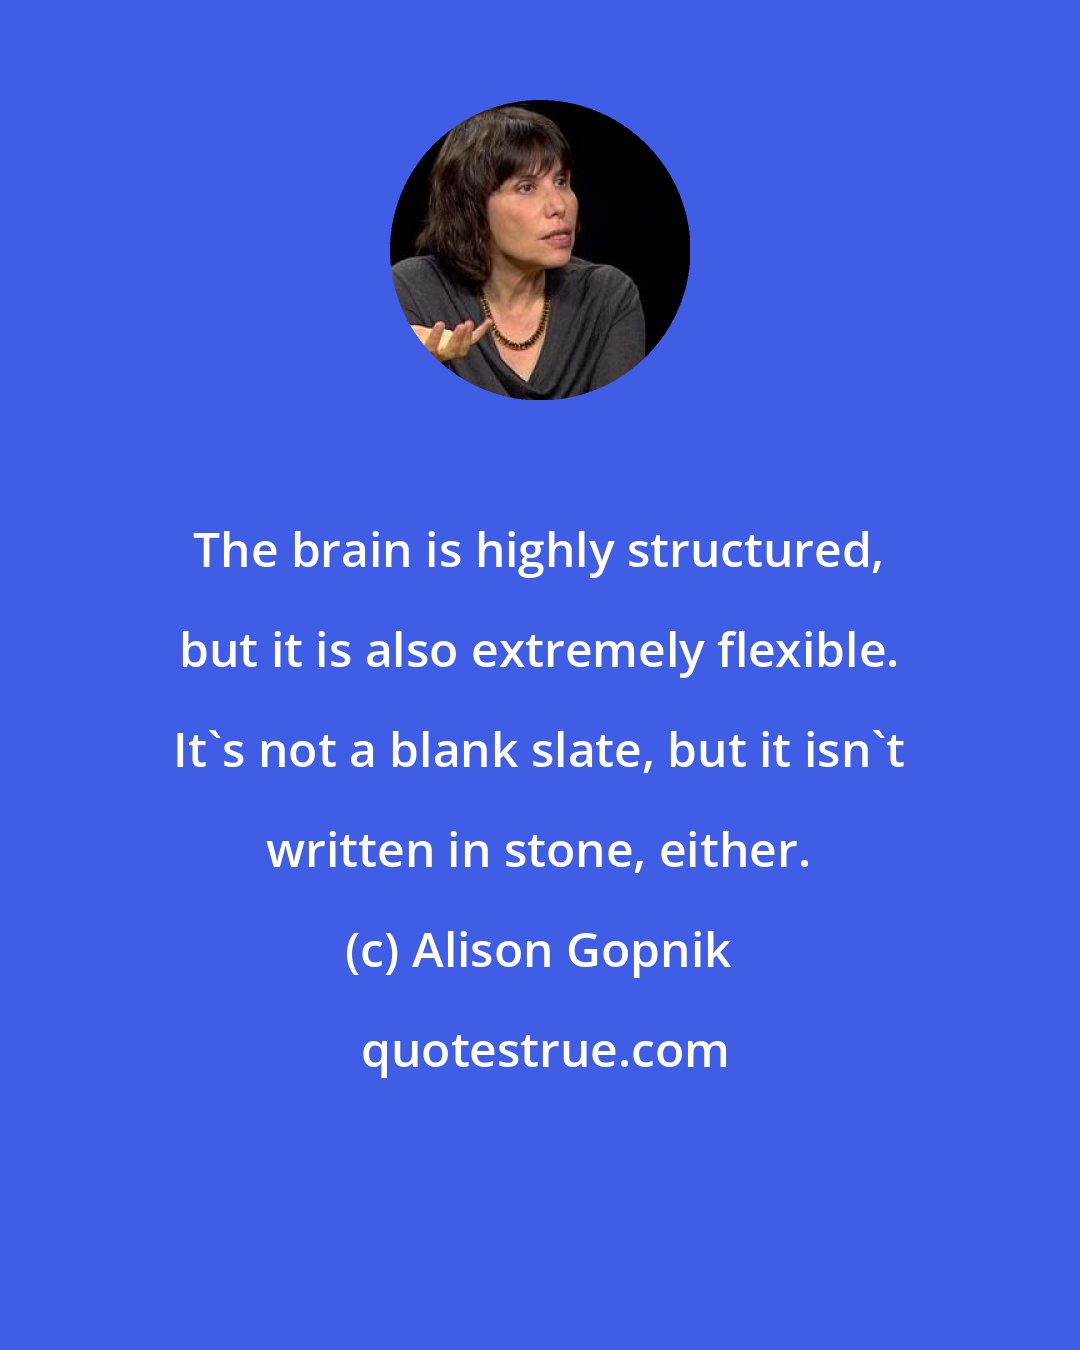 Alison Gopnik: The brain is highly structured, but it is also extremely flexible. It's not a blank slate, but it isn't written in stone, either.